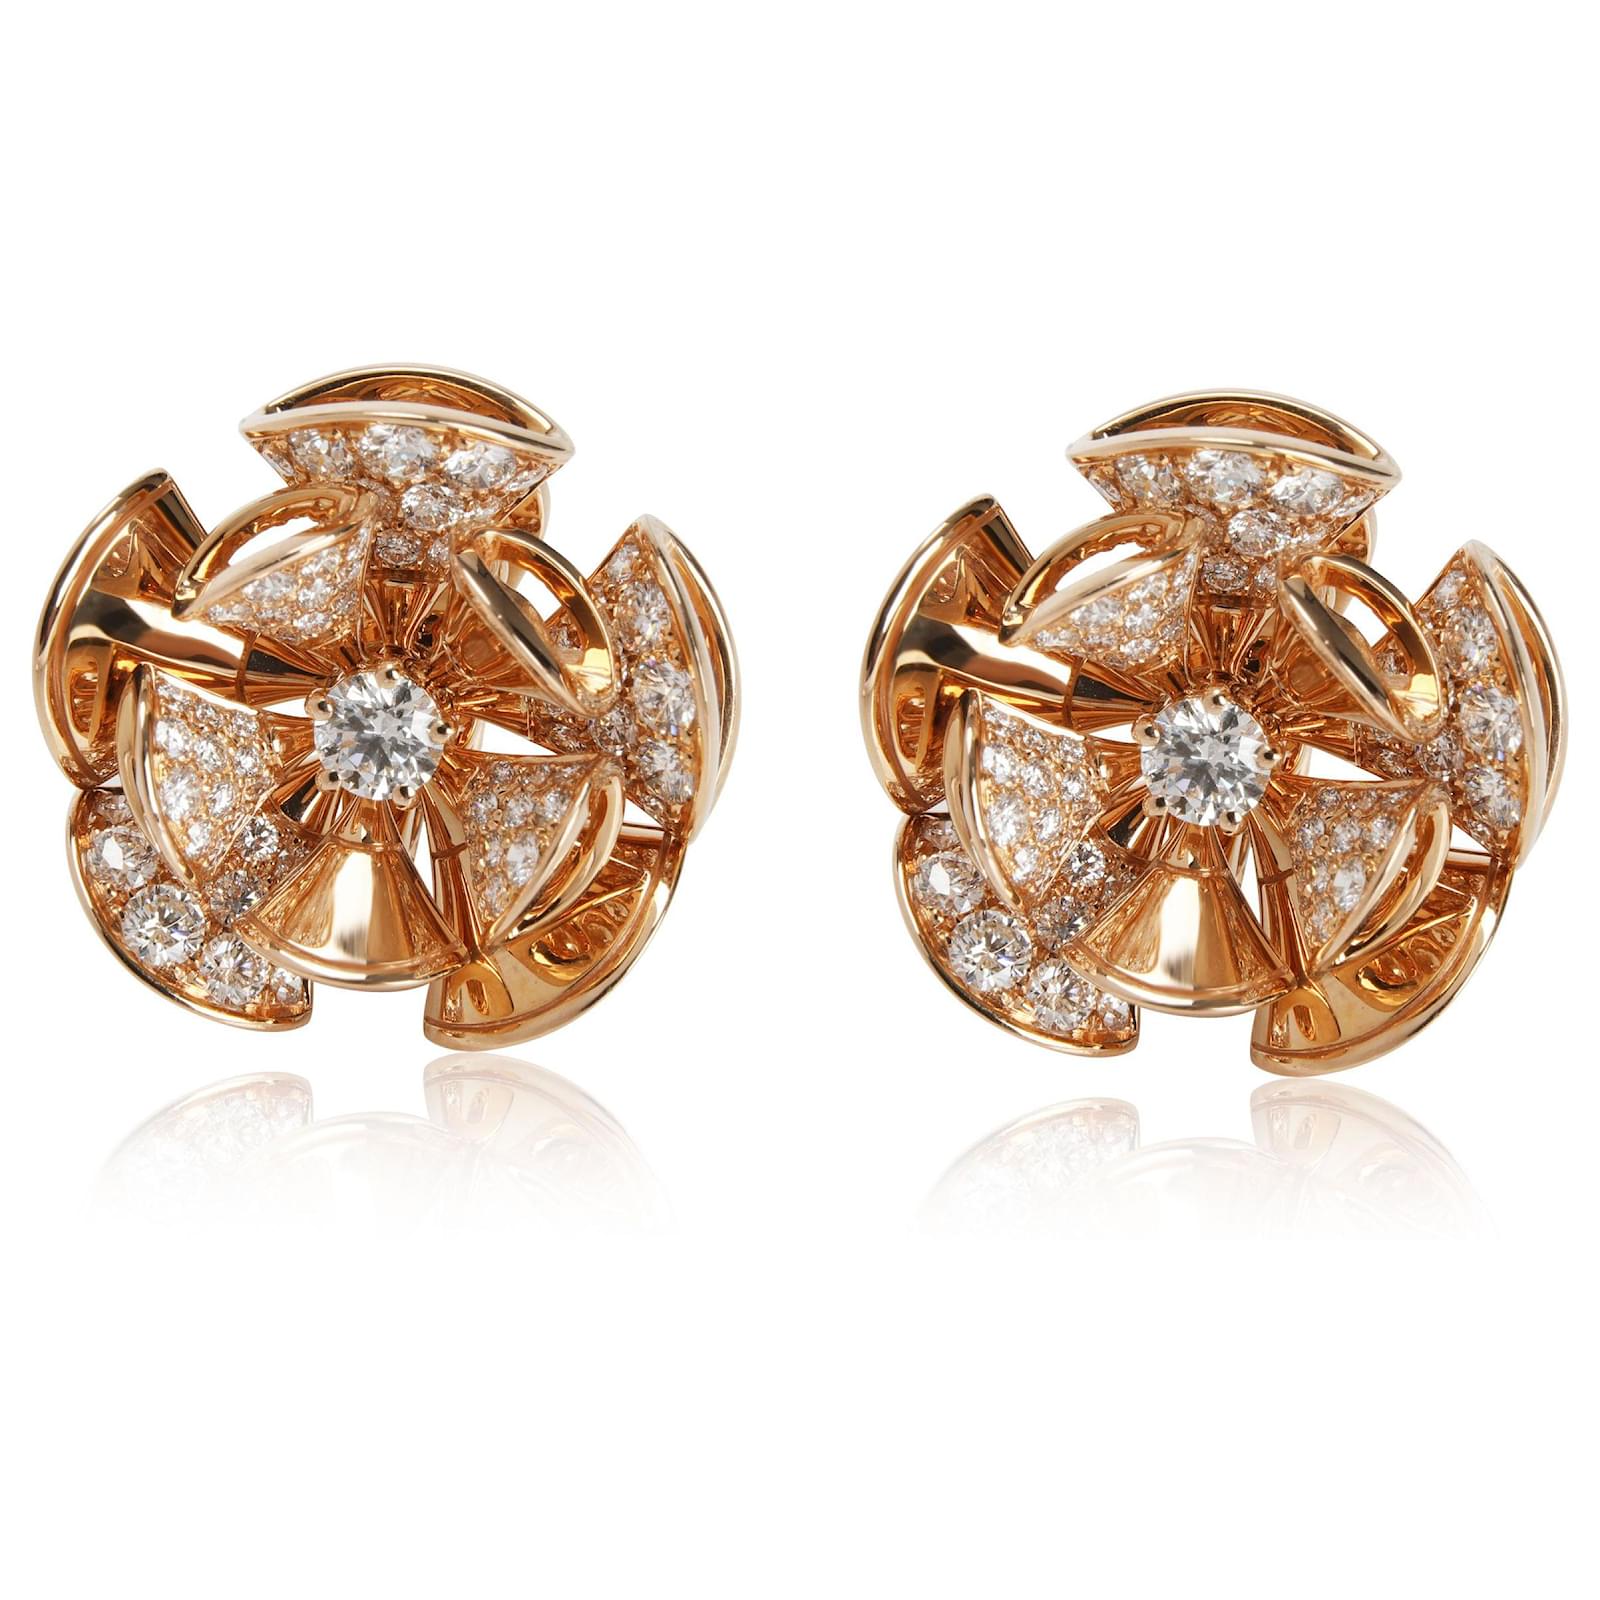 Buy Saraf RS Jewellery Royal Emerald Studs Rose Gold Plated Ad Brass Tops  Small Earrings online